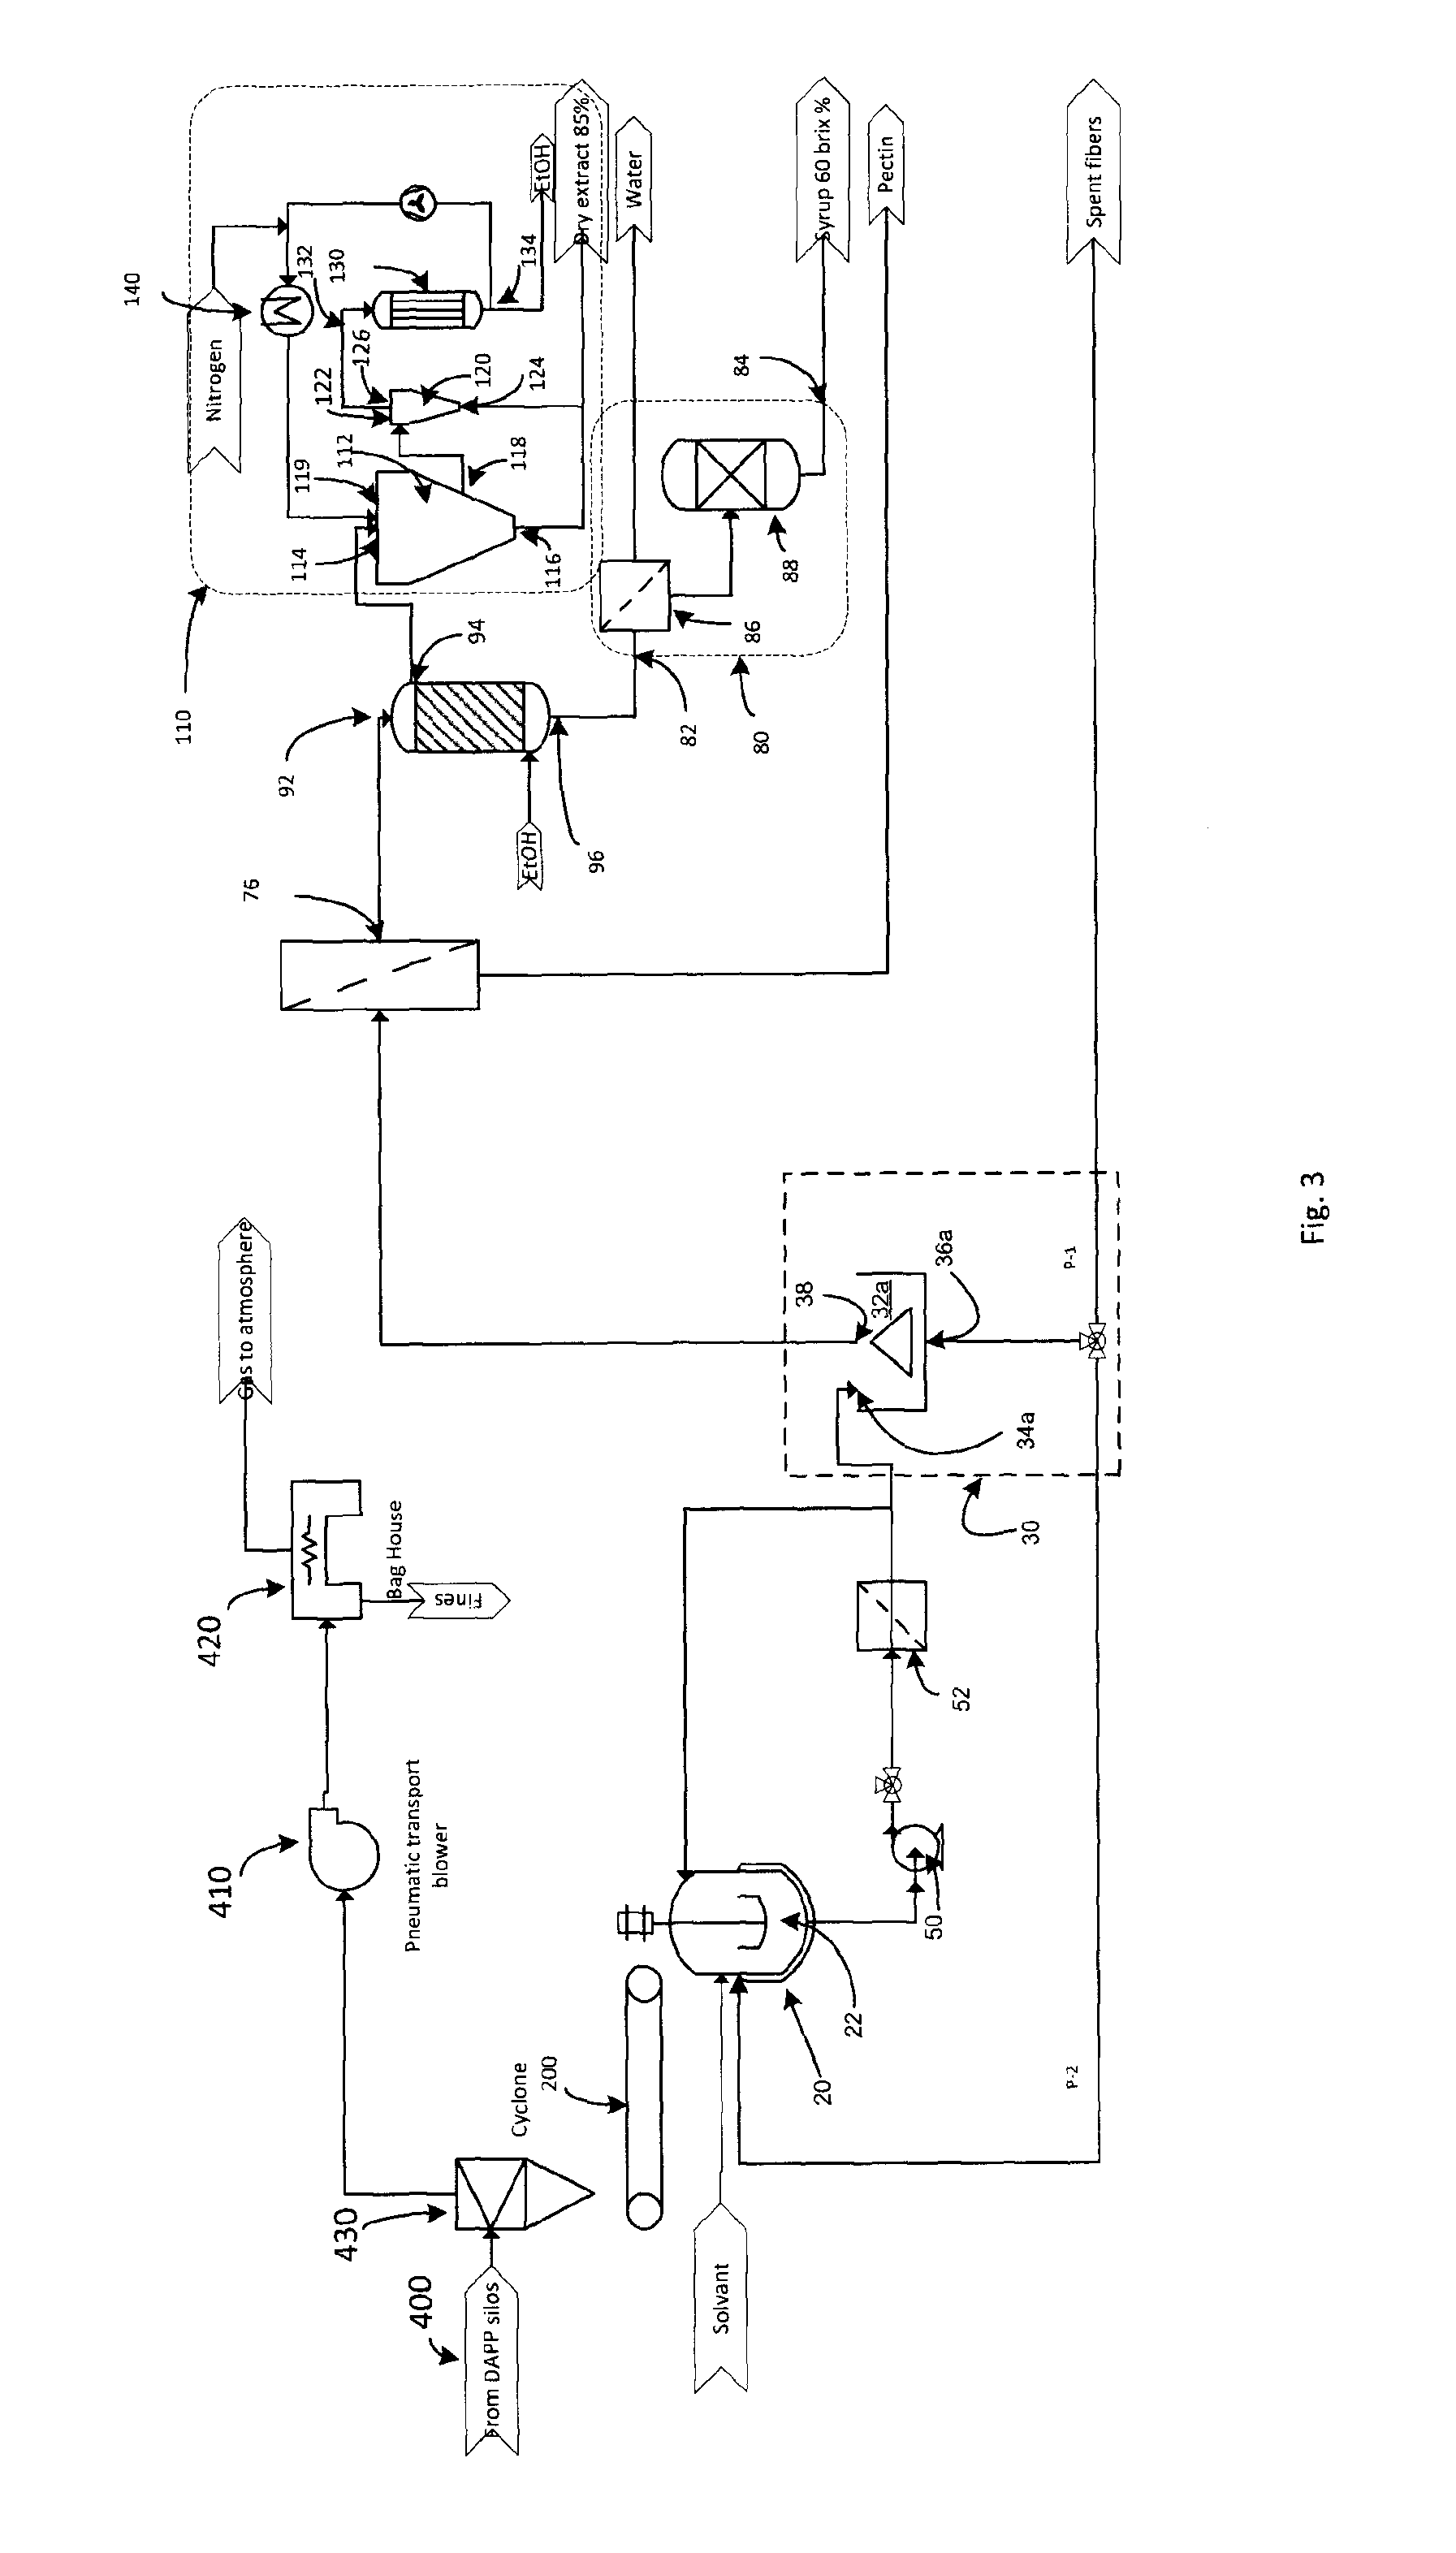 System and process for extraction of products from apple peel